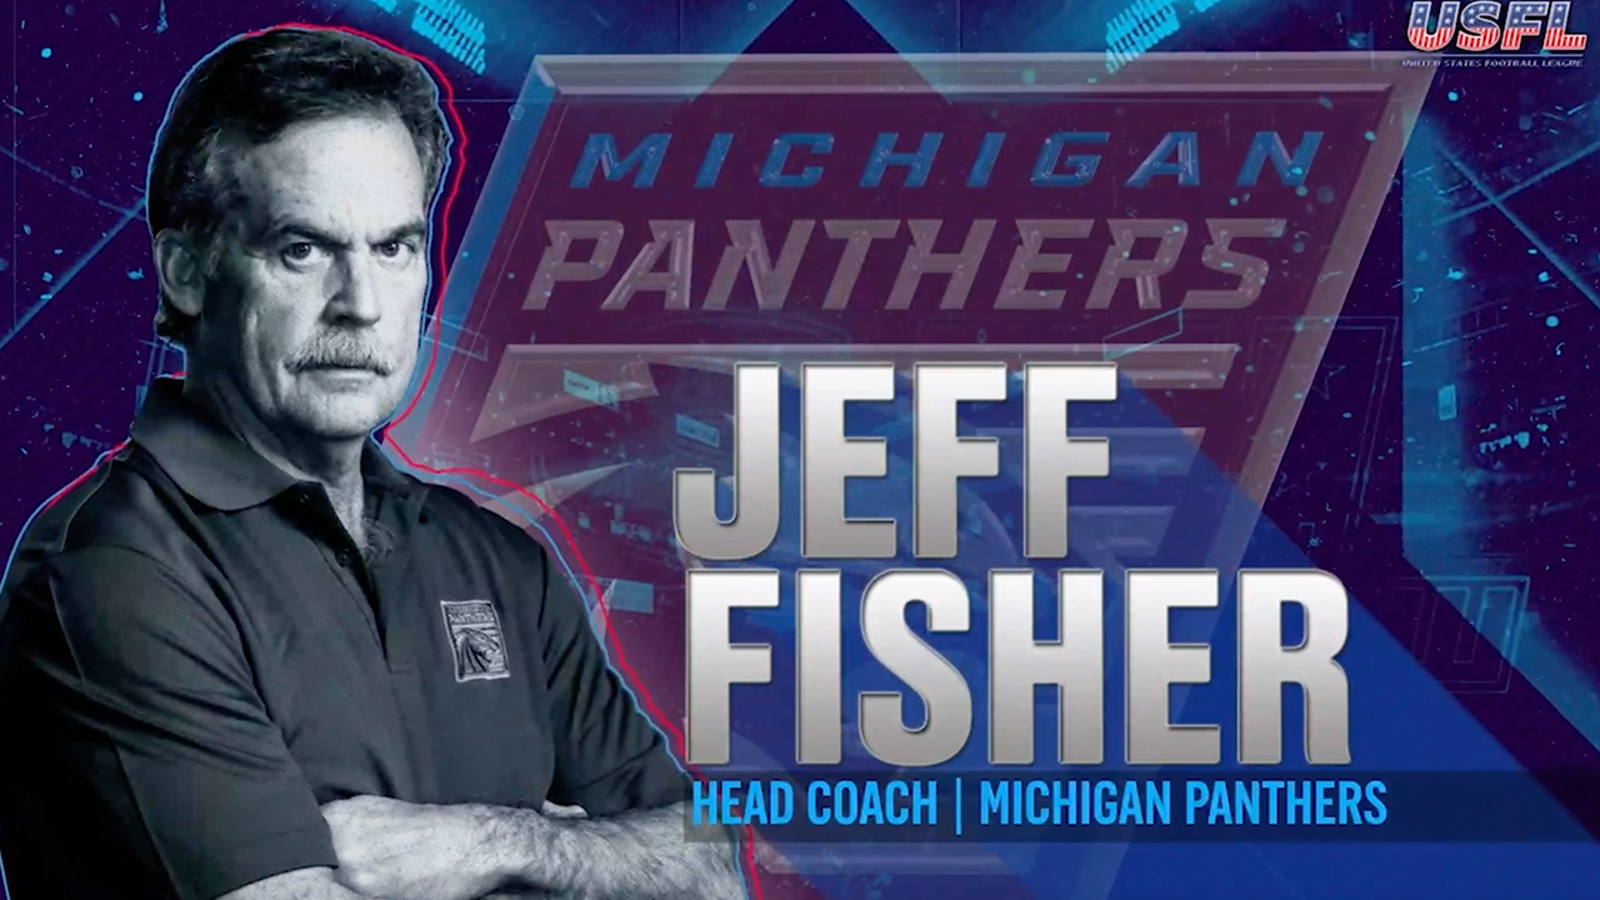 "Fall in love with us" — Jeff Fisher on what he wants from Panthers fans